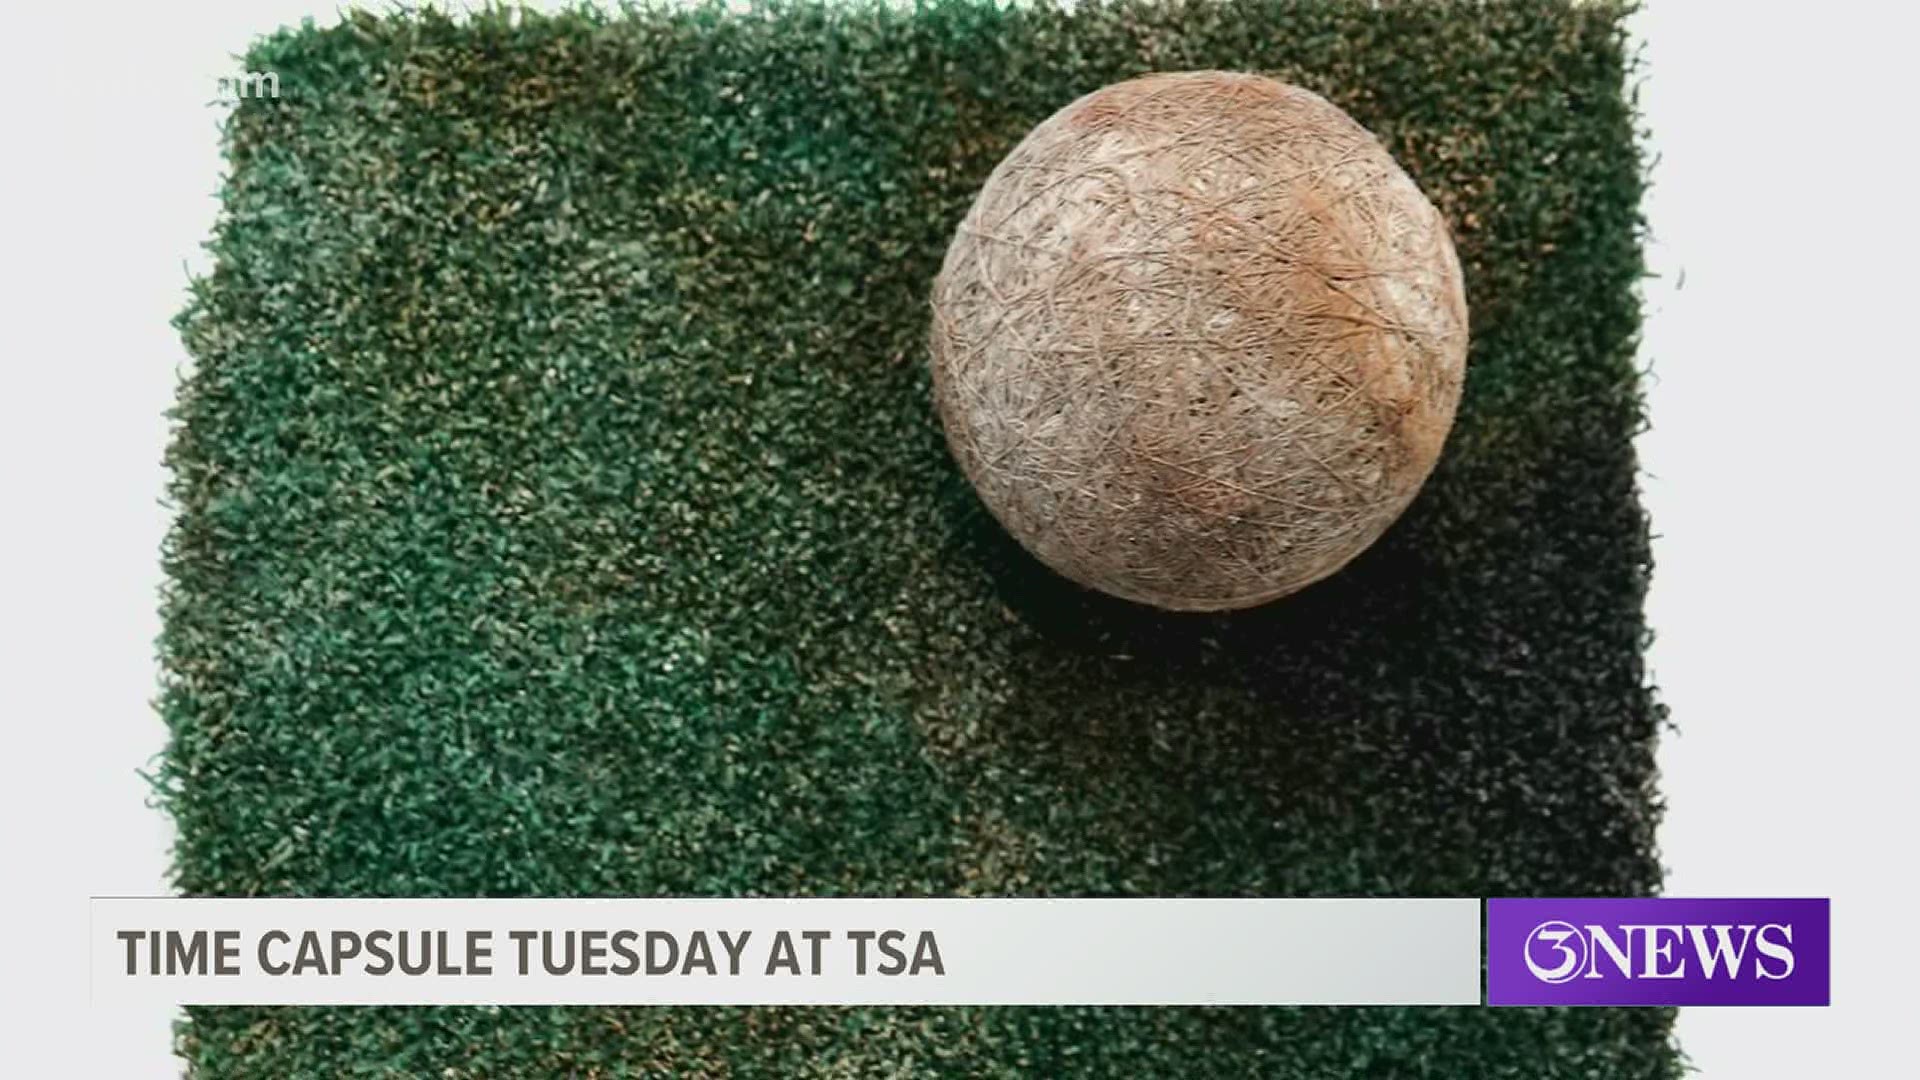 Every Tuesday, the TSA will be revealing items that have been stored inside a capsule since 1991.